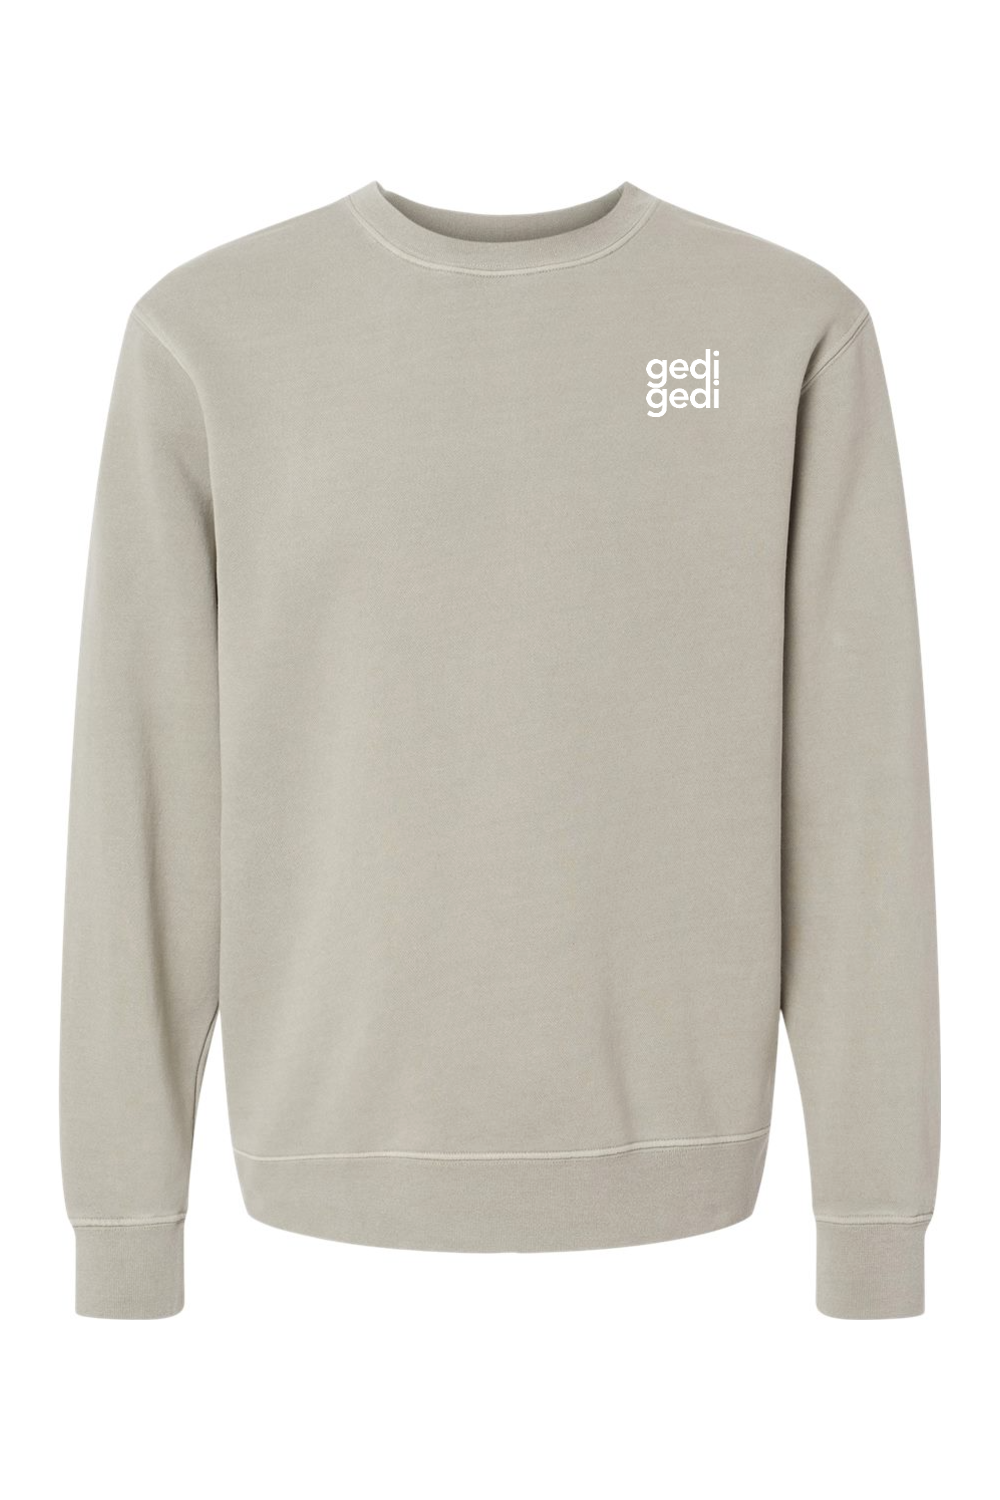 Independent Trading Co. Crewneck